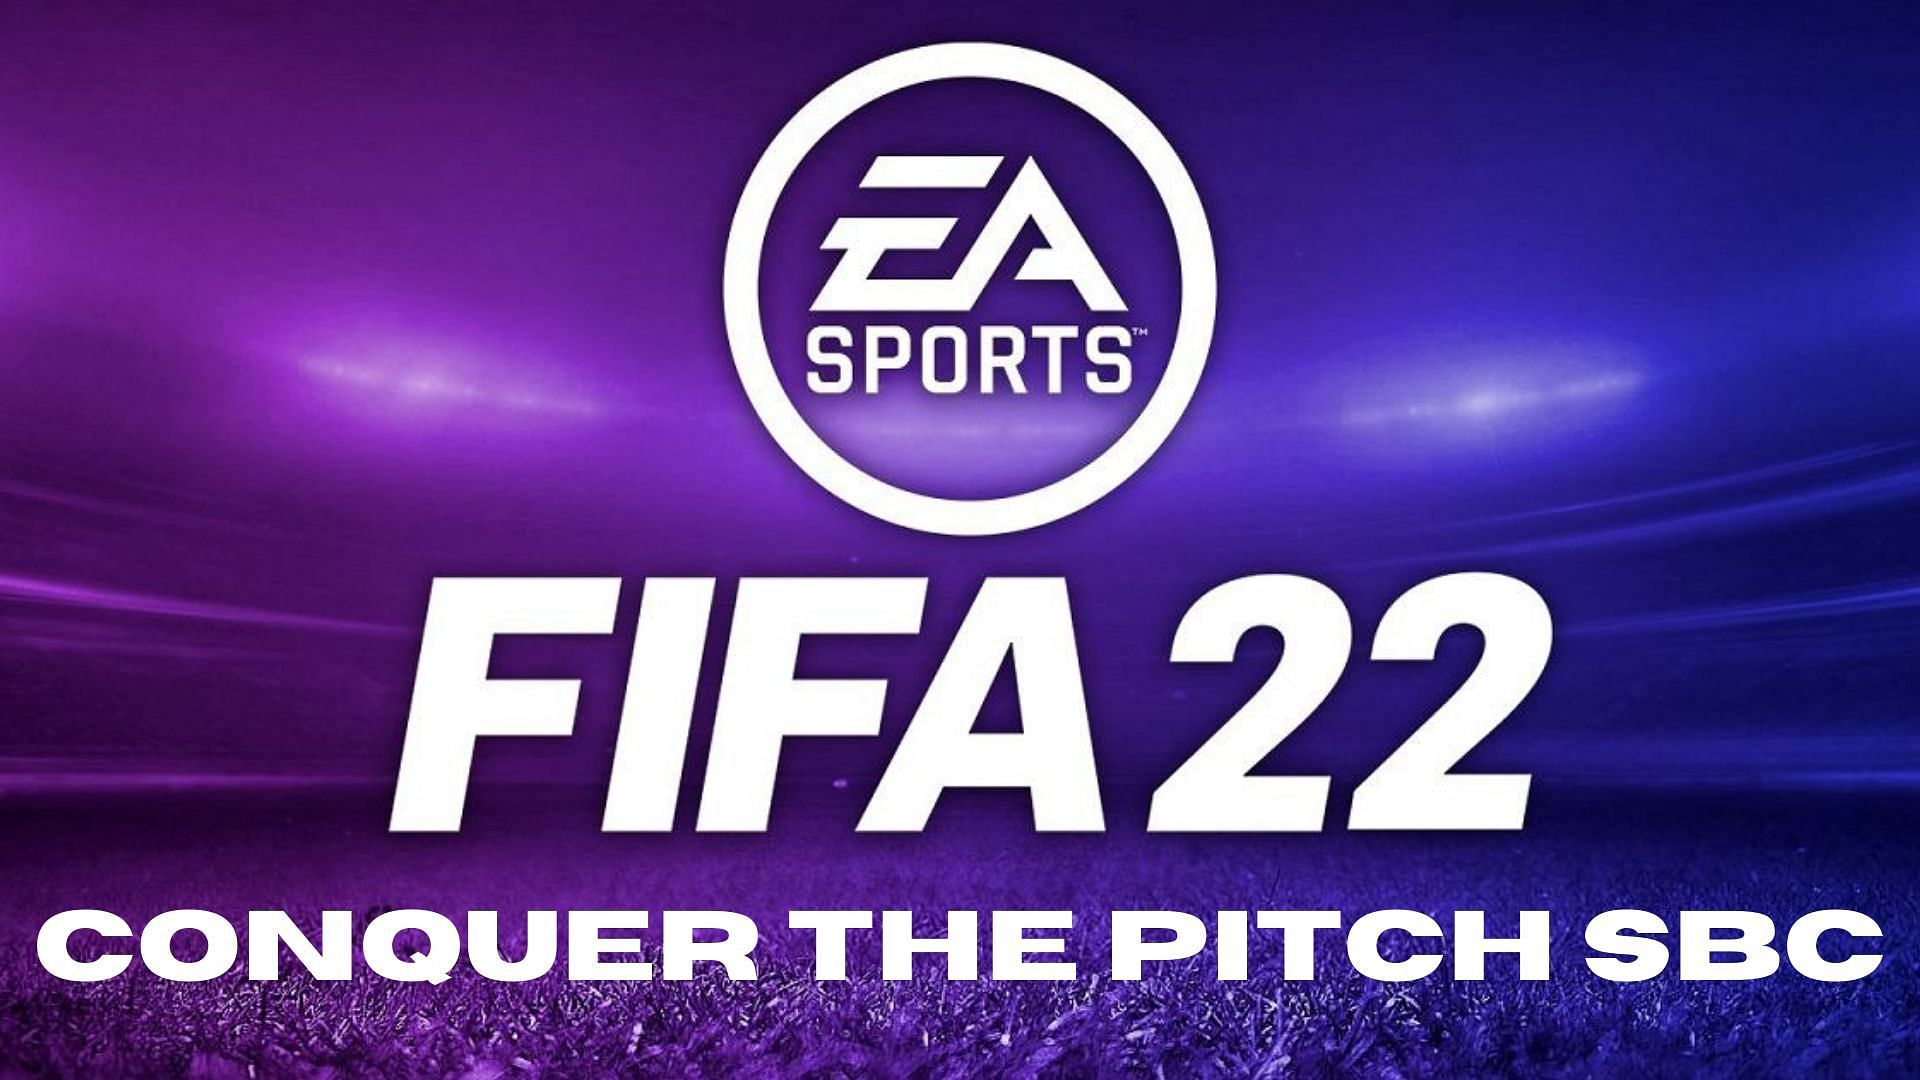 Conquer The Pitch SBC is now live in FIFA 22 Ultimate Team (Image via Sportskeeda)